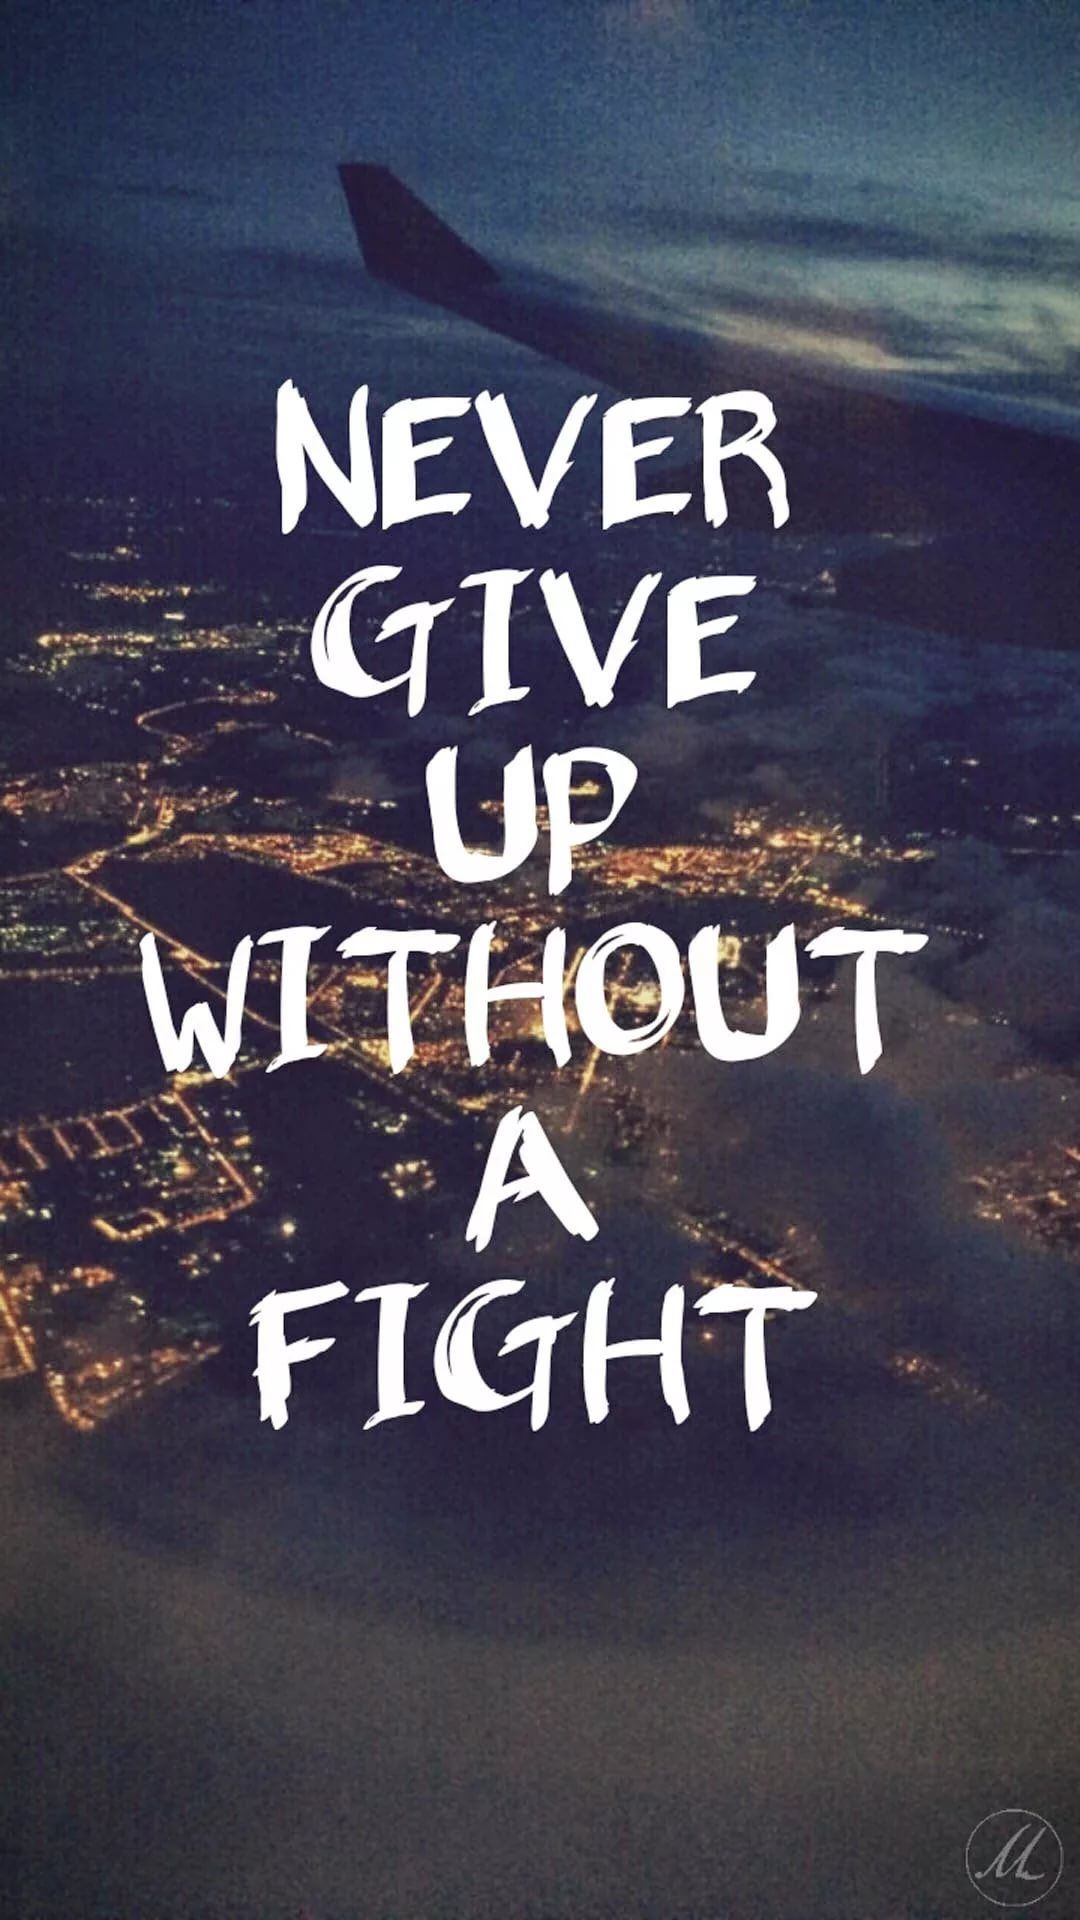 Never Give Up phone background